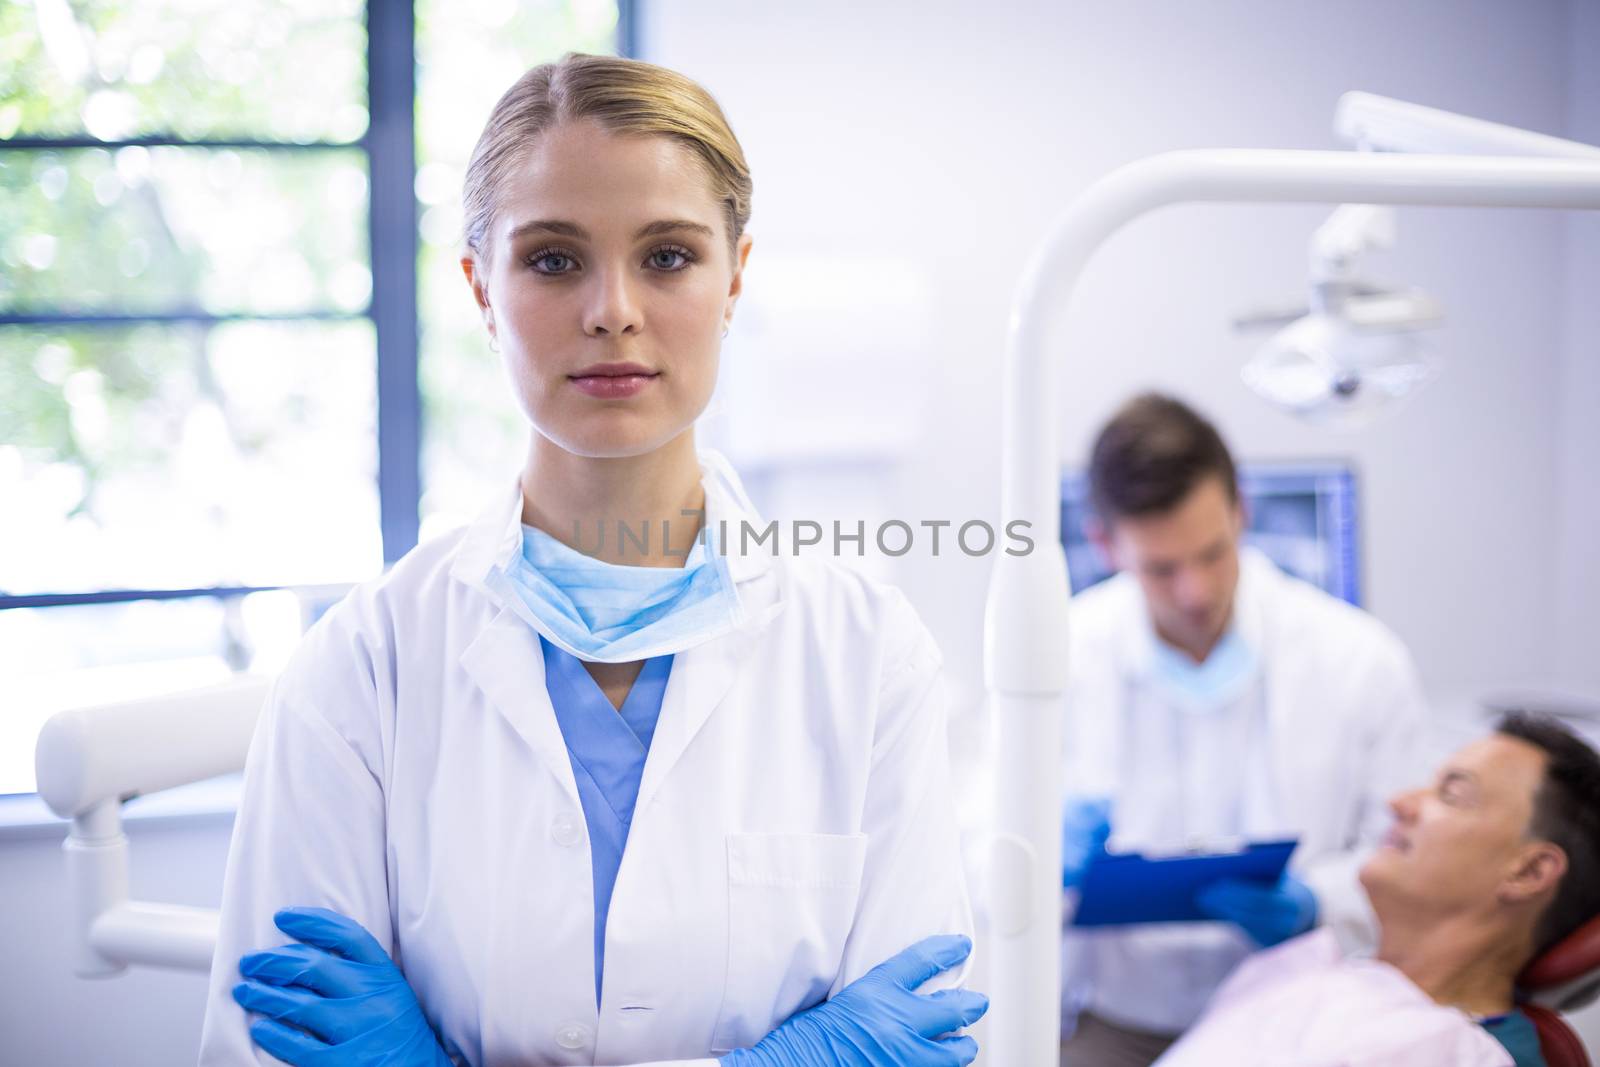 Portrait of dentist standing with arms crossed while her colleague examining patient in background